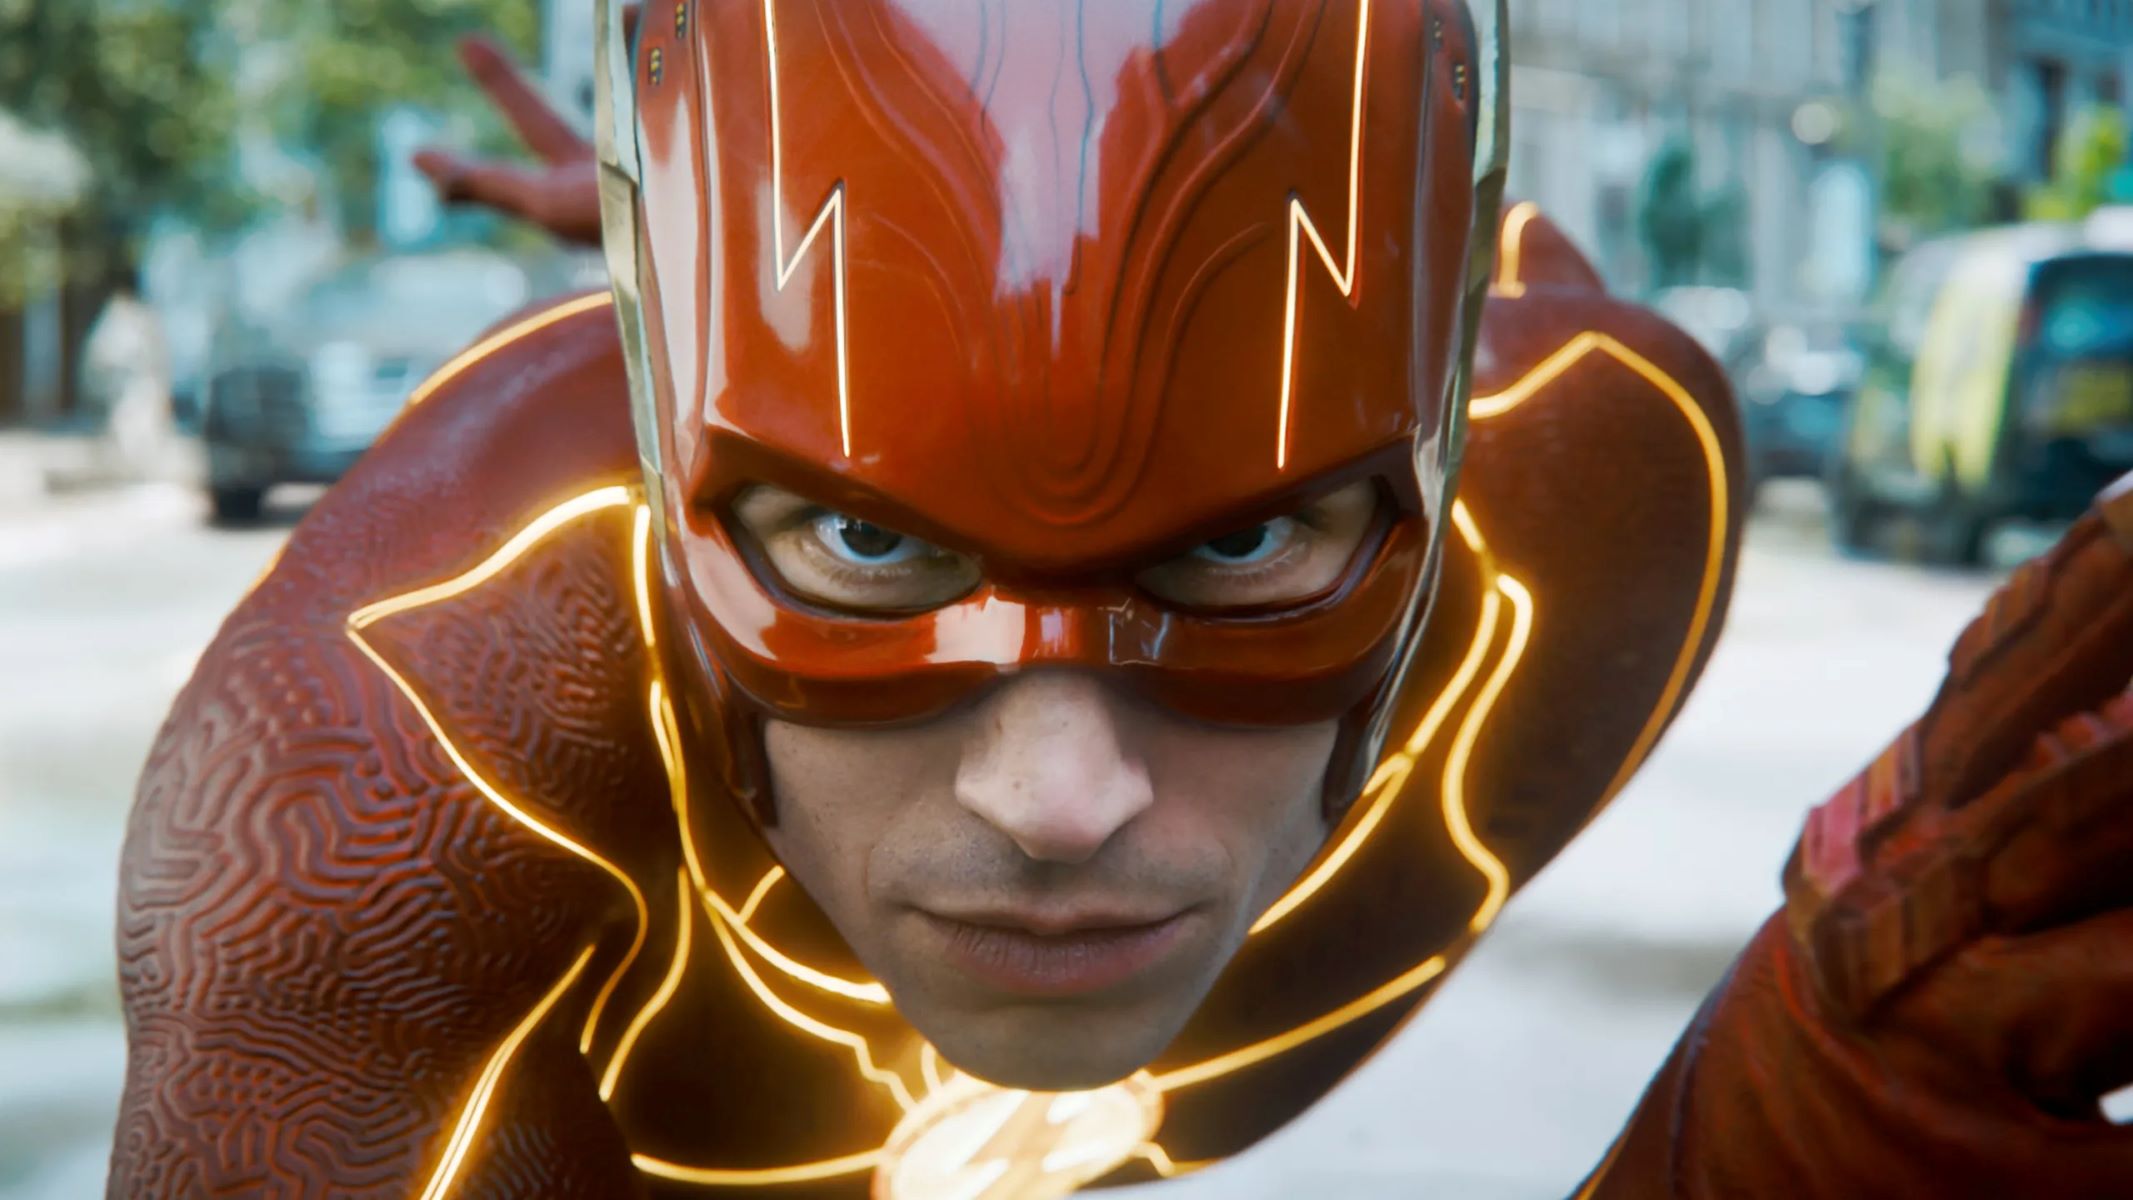 The Shocking Secret Behind The Flash's Electrifying Speed In The Justice League Movie!